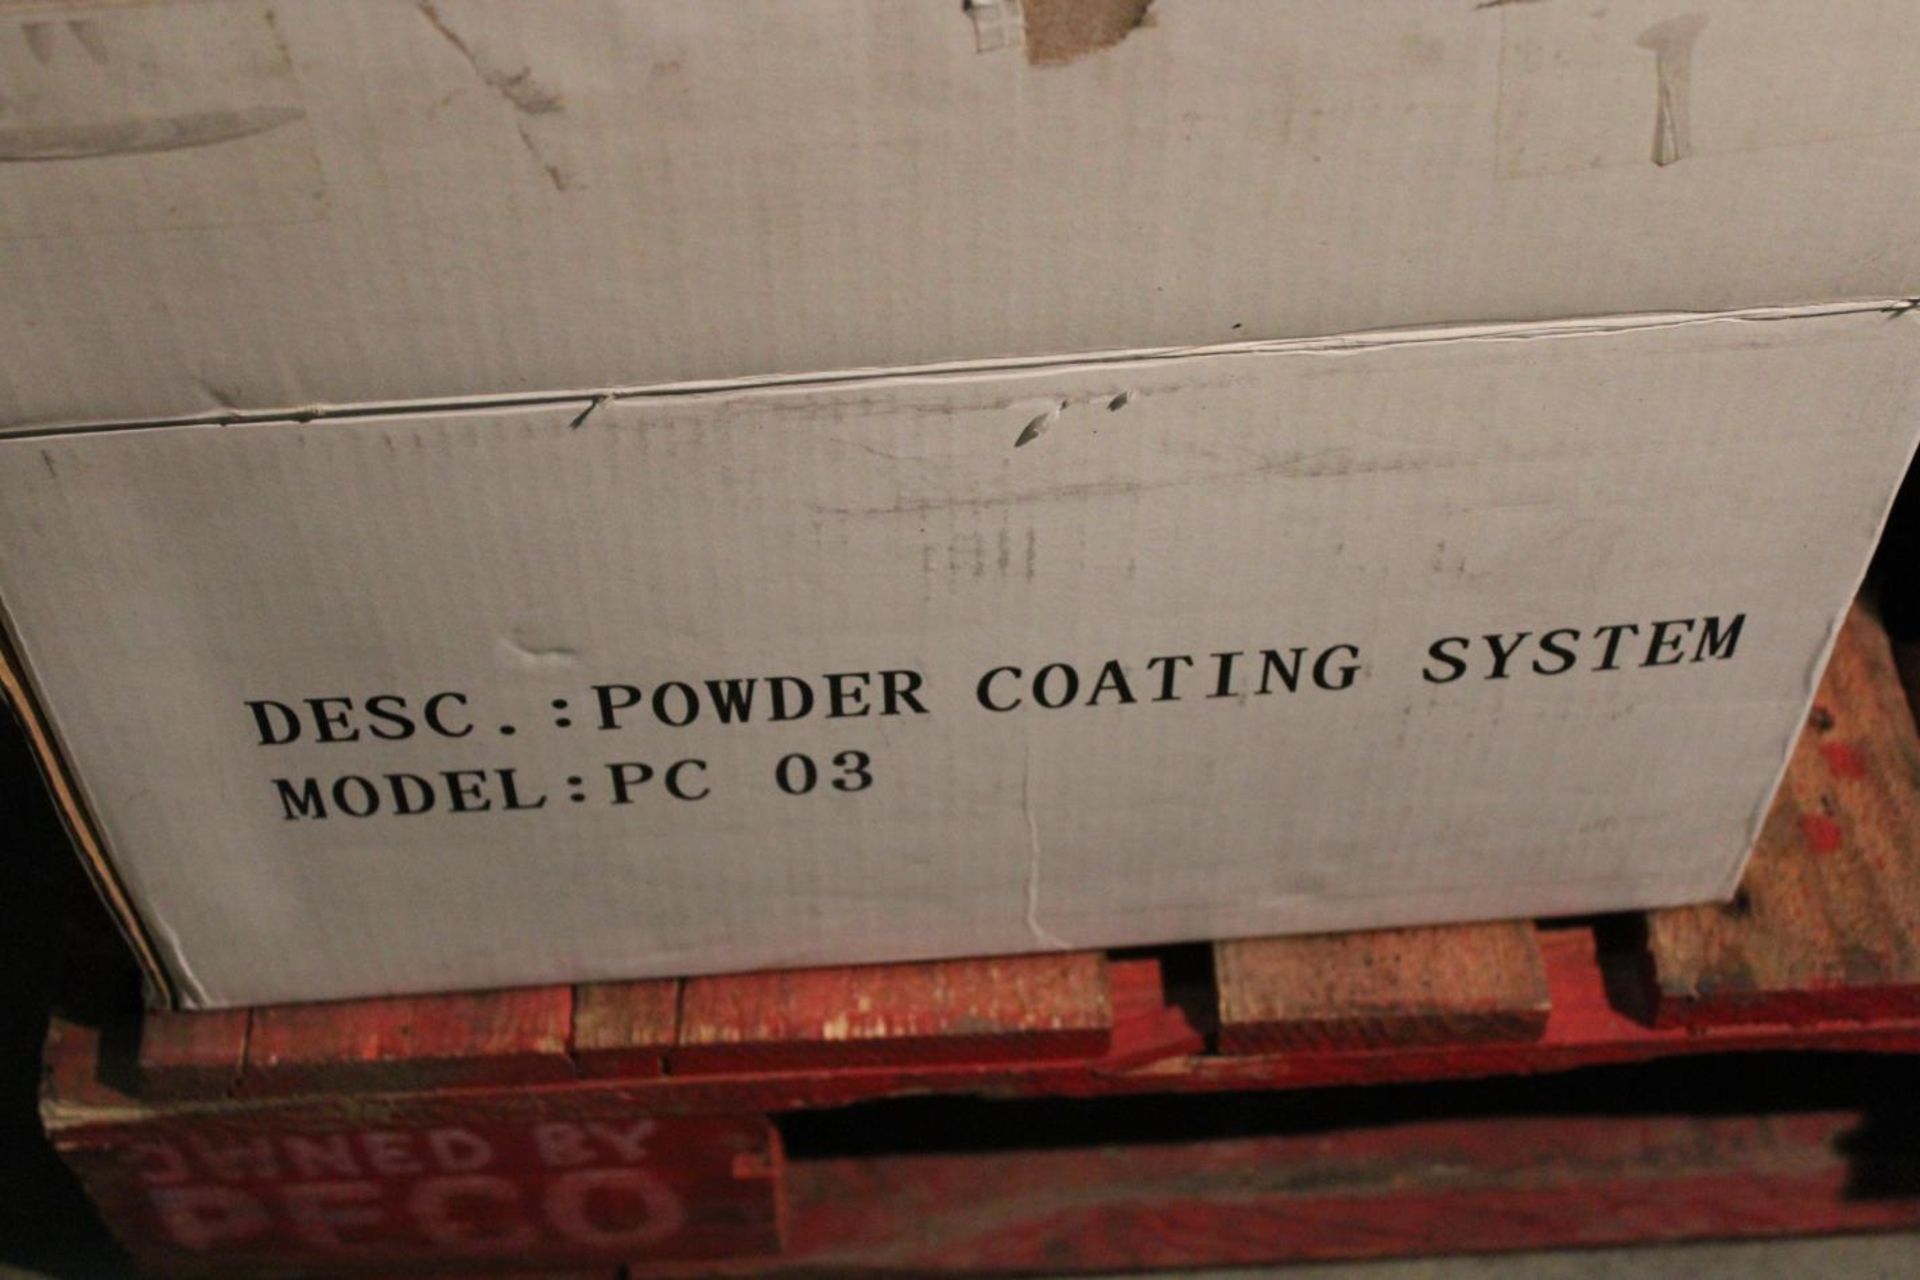 PC03 Powder Coating System with Toaster Oven - Image 2 of 3